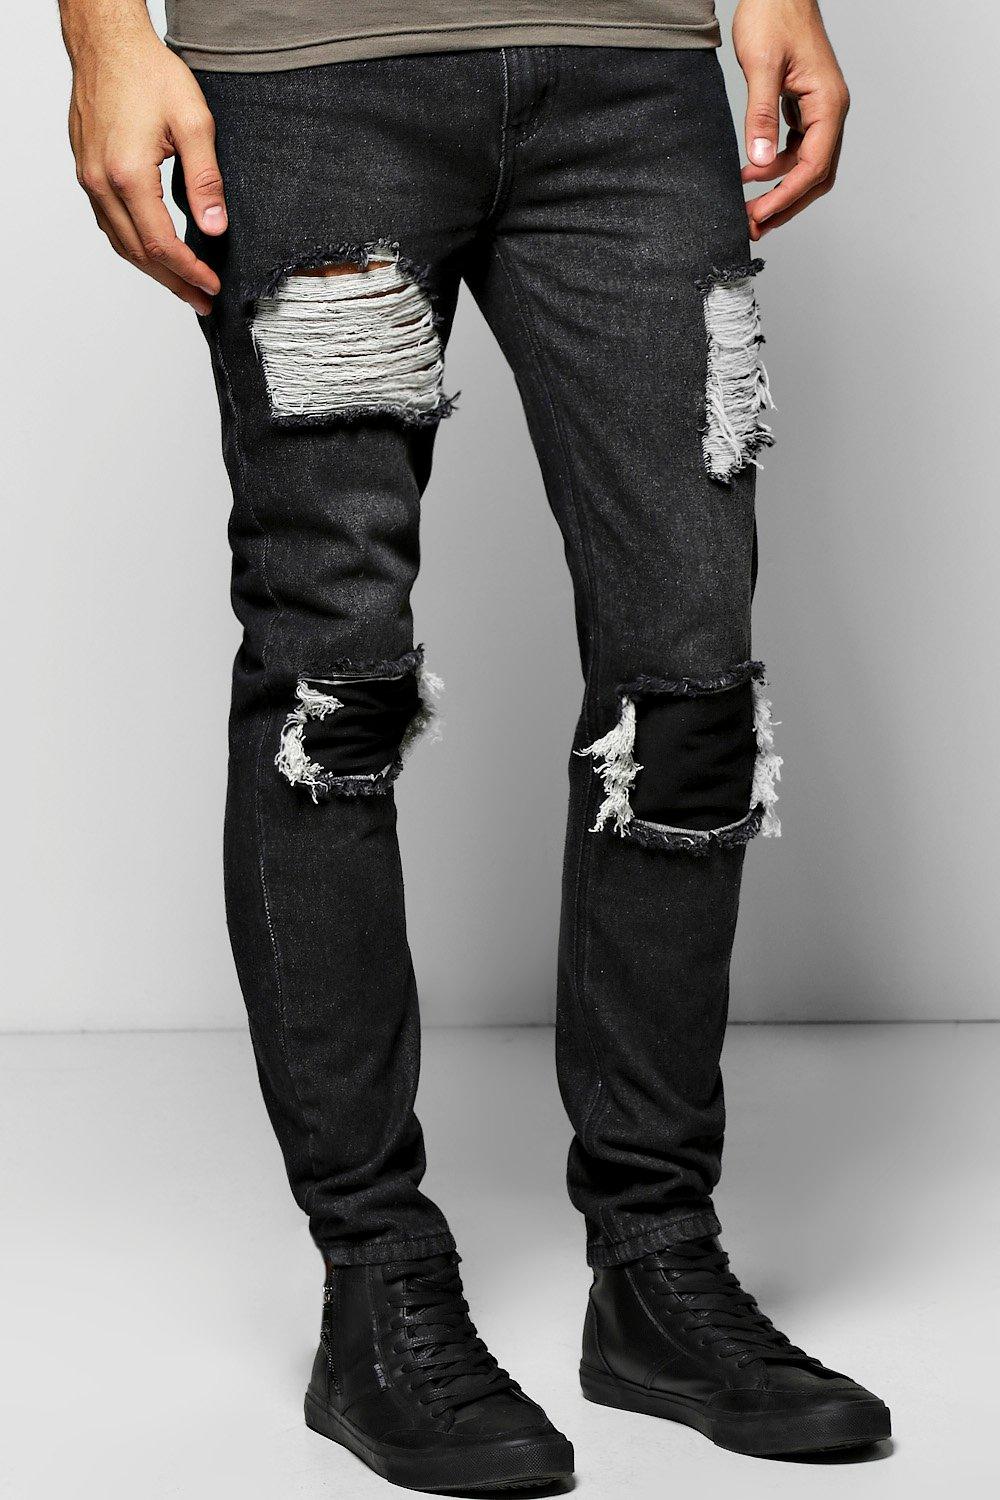 ripped repaired jeans mens